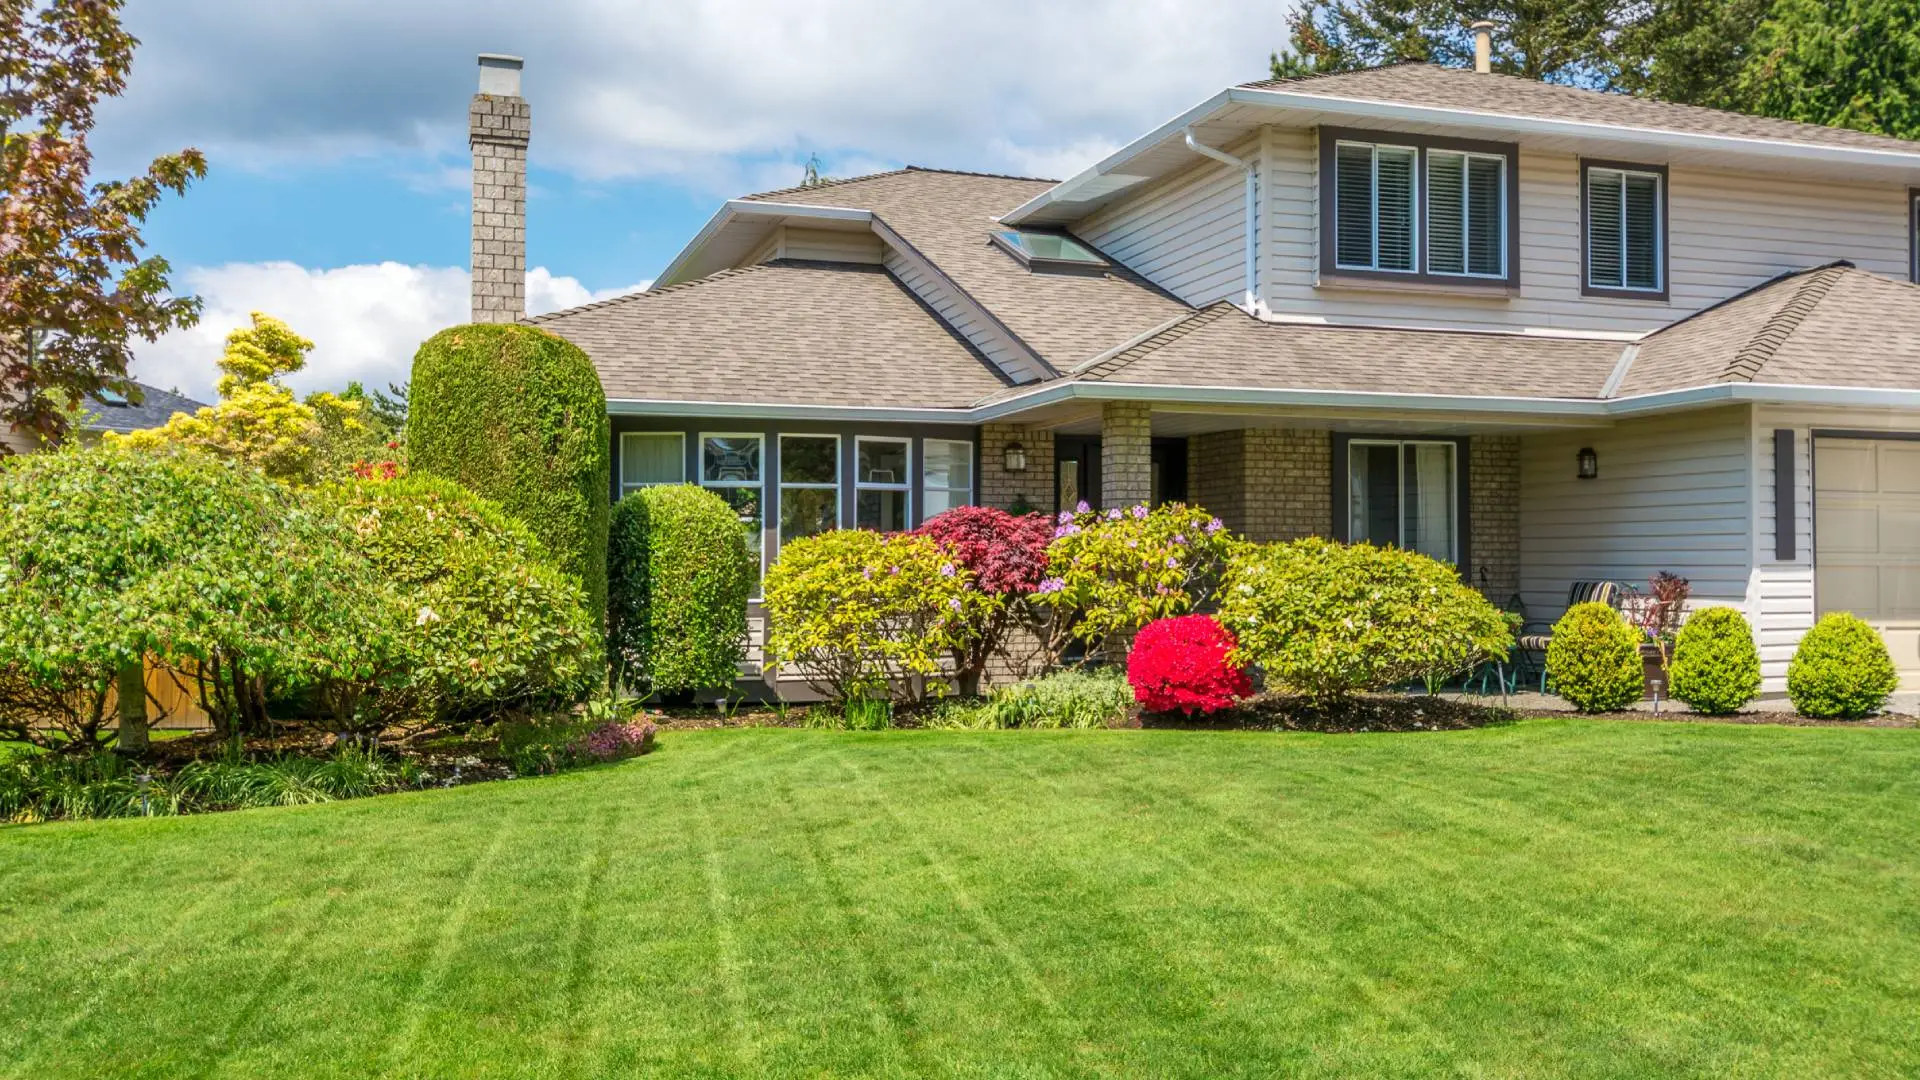 Lawn Care Services That Can Transform Your Bartlett Property